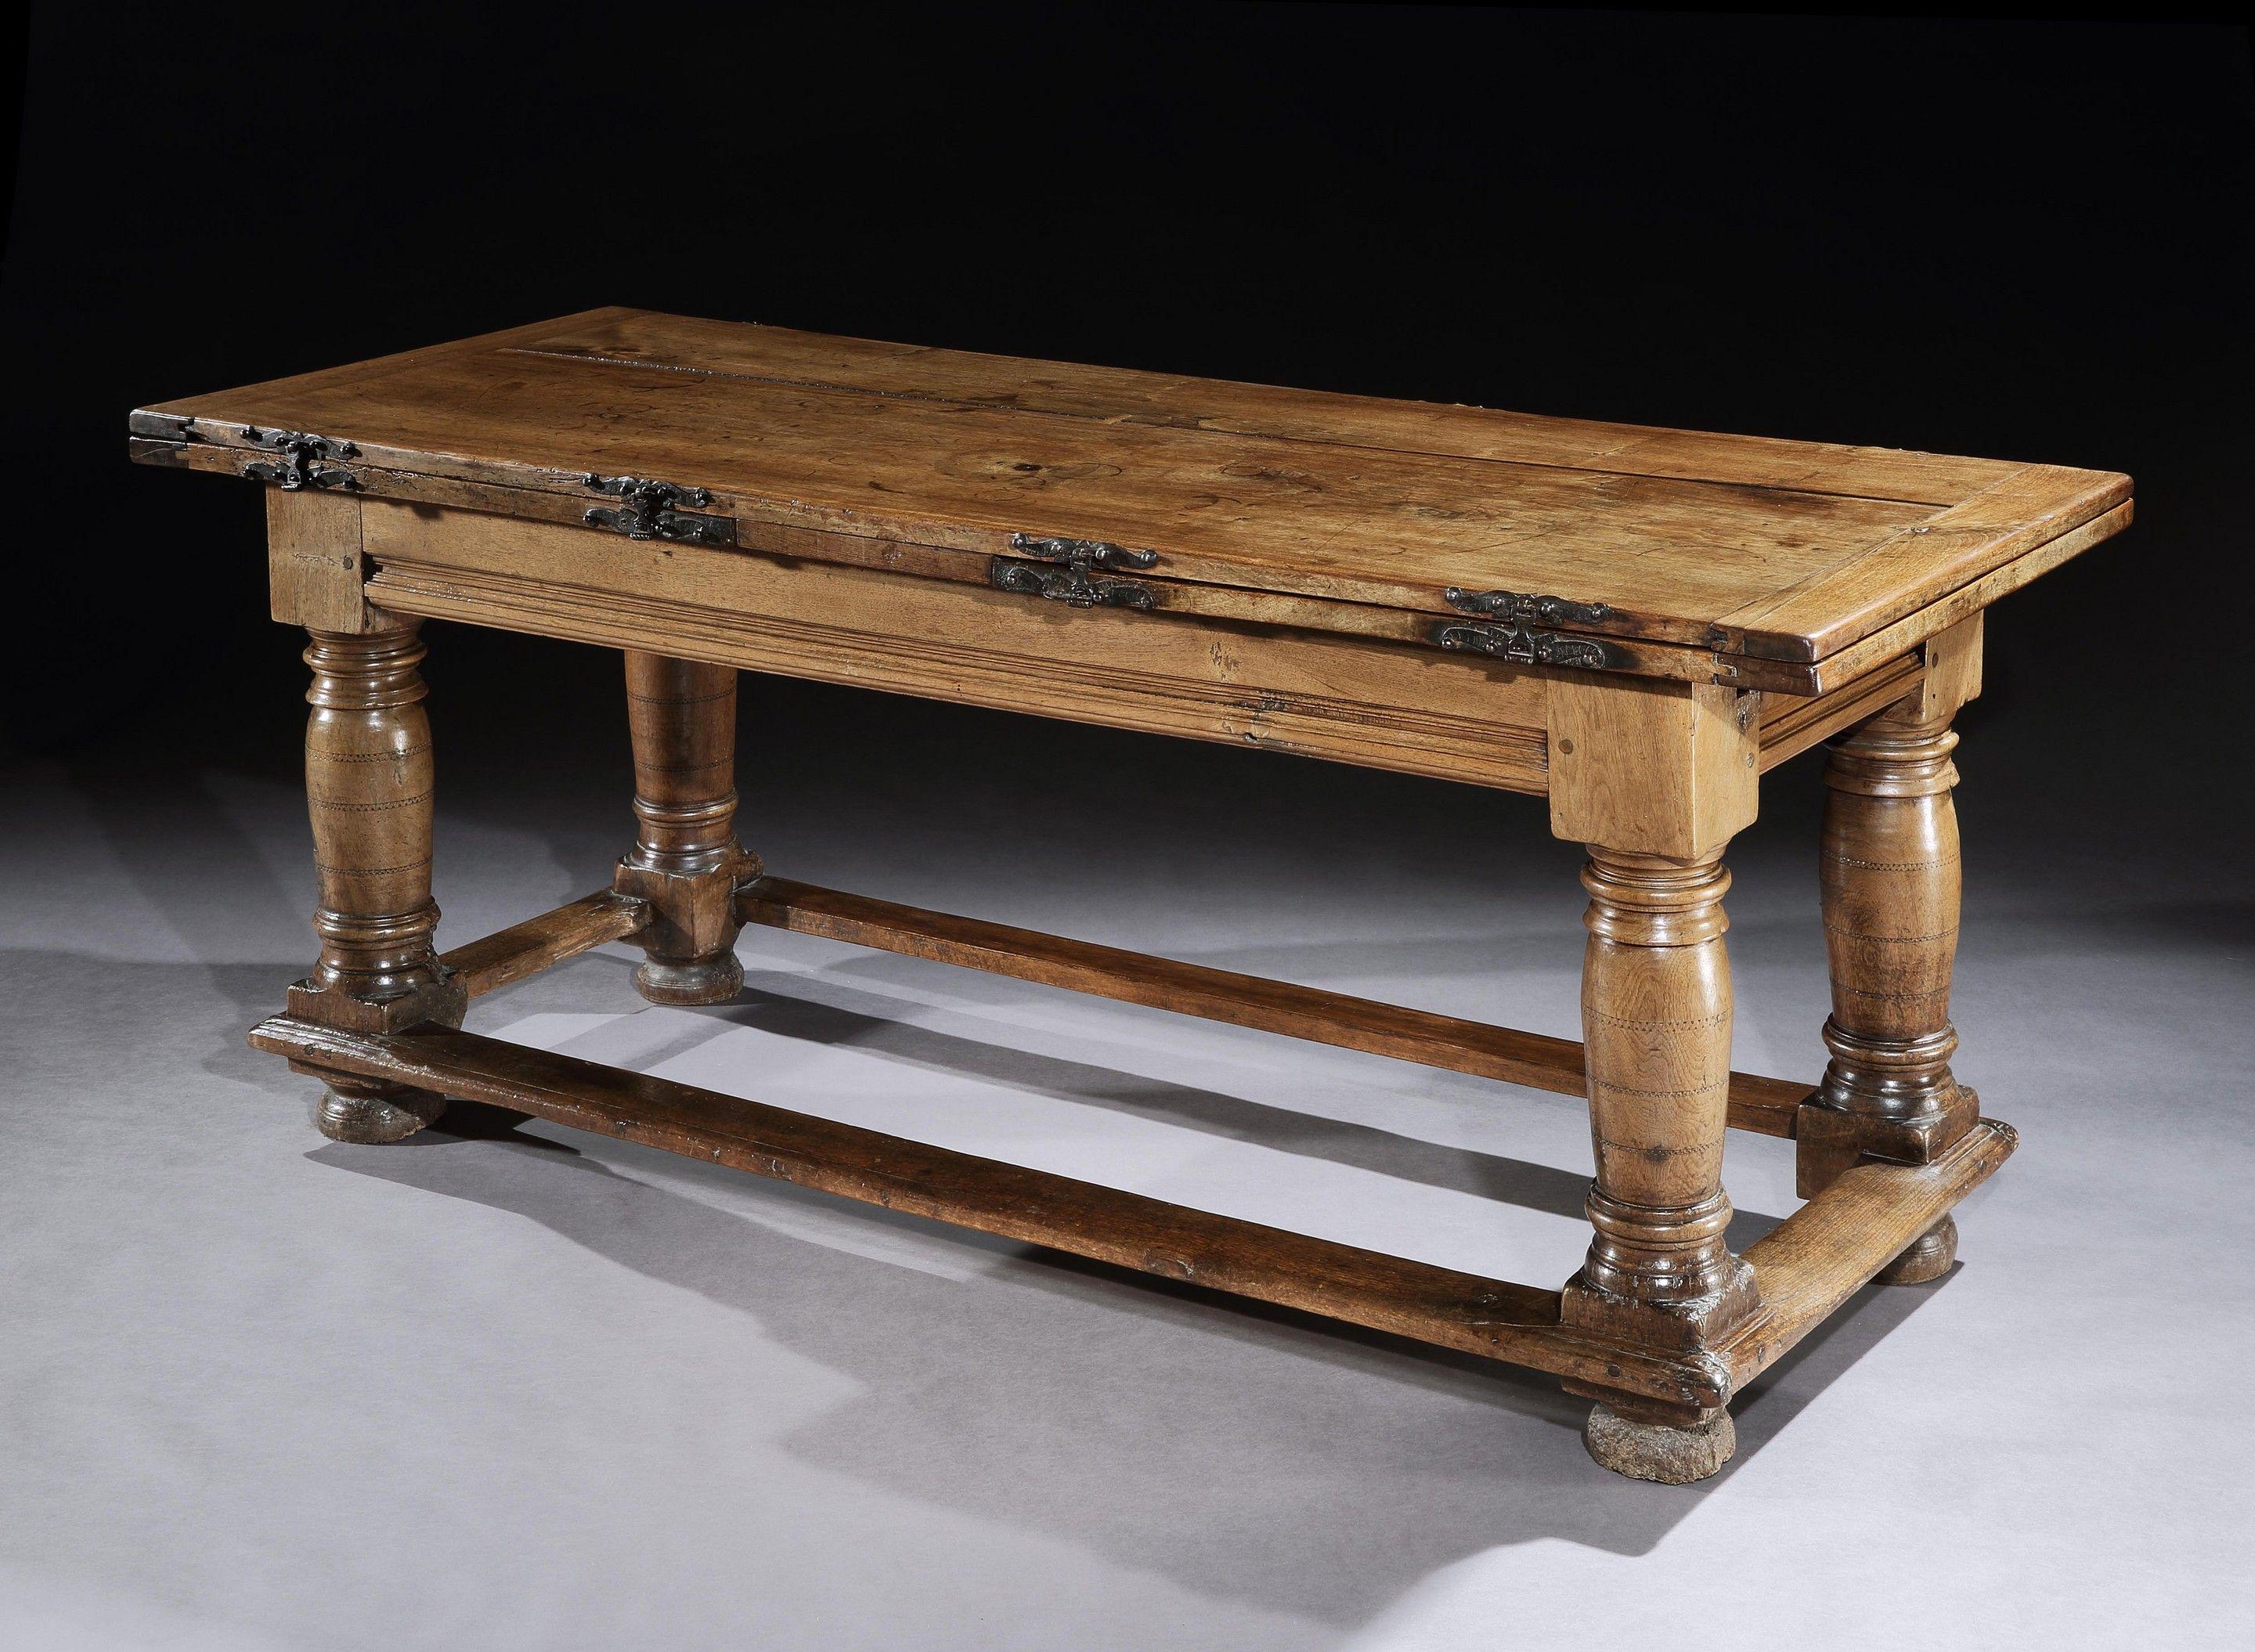 This massive 18-seat table has many features which are typical of drawleaf tables that were made in the last quarter of the 16th century. Early continental drawleaf tables rarely come onto the open market and the massive extended length, original